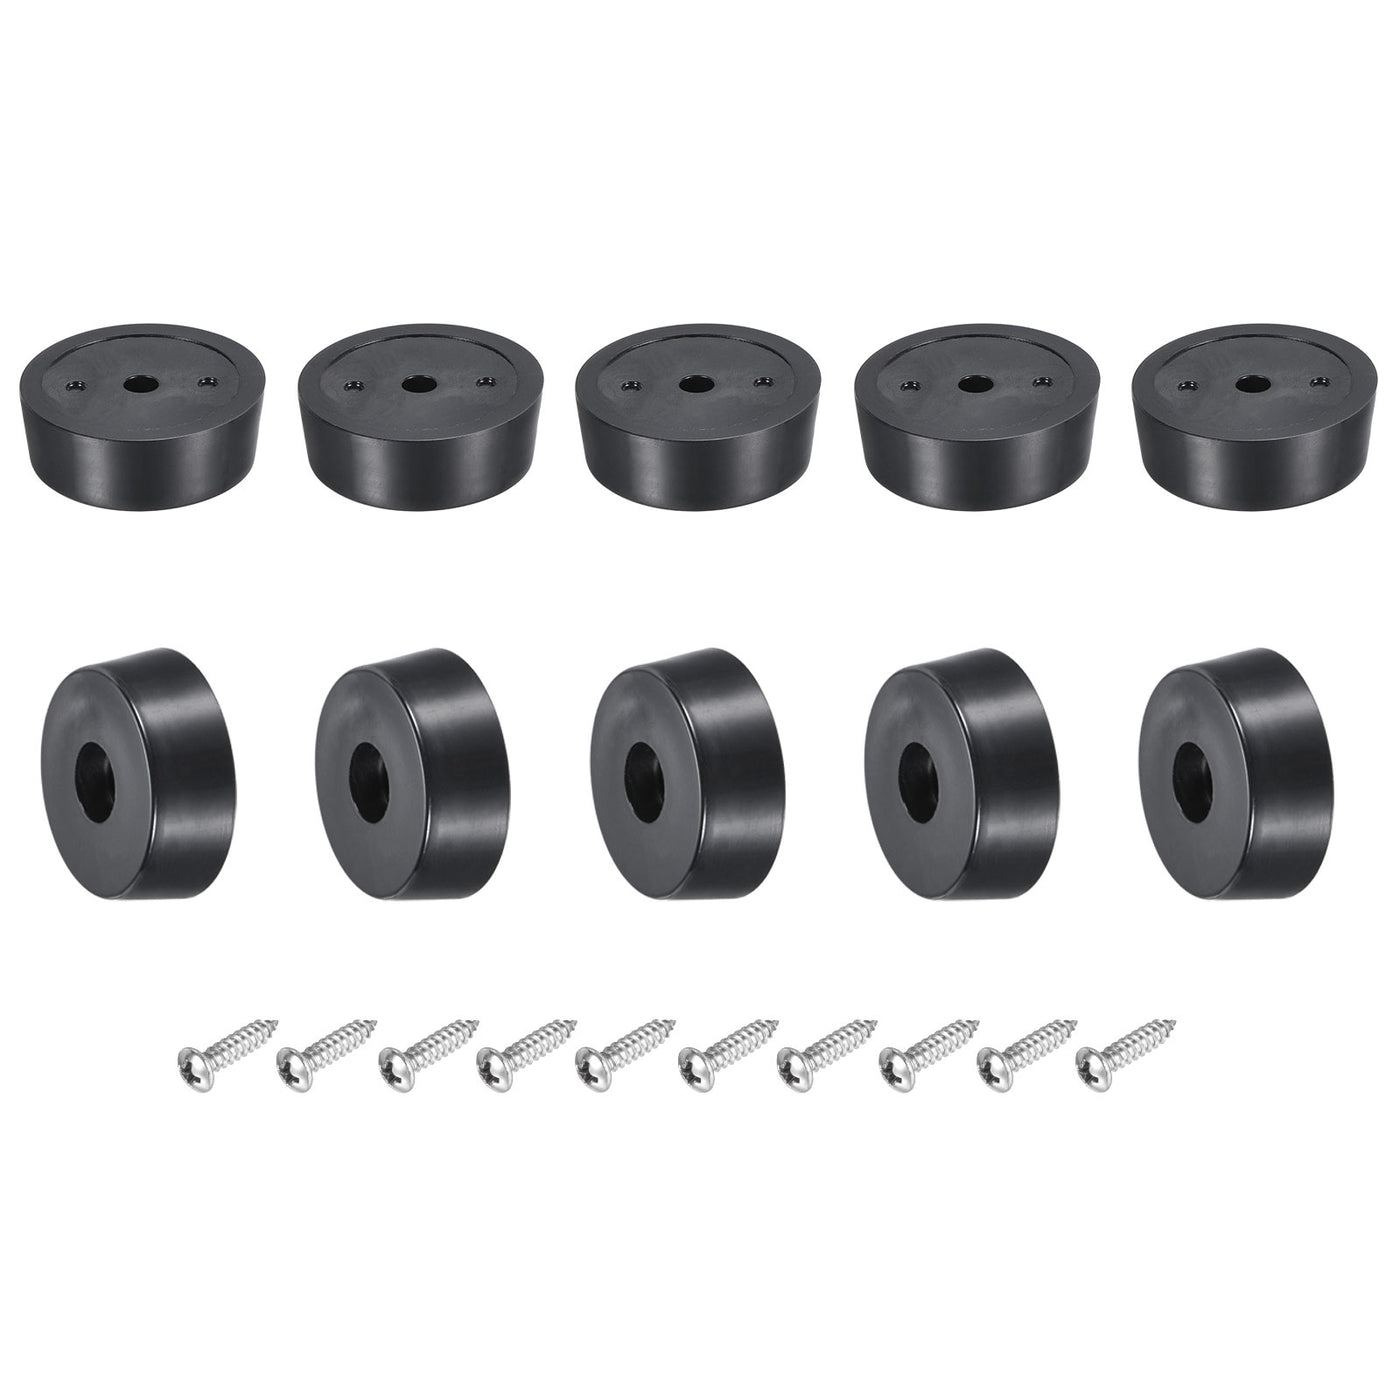 uxcell Uxcell Rubber Bumper Feet, 0.35" H x 0.98" W Round Pads with Stainless Steel Washer and Screws for Furniture, Appliances, Electronics 20 Pcs